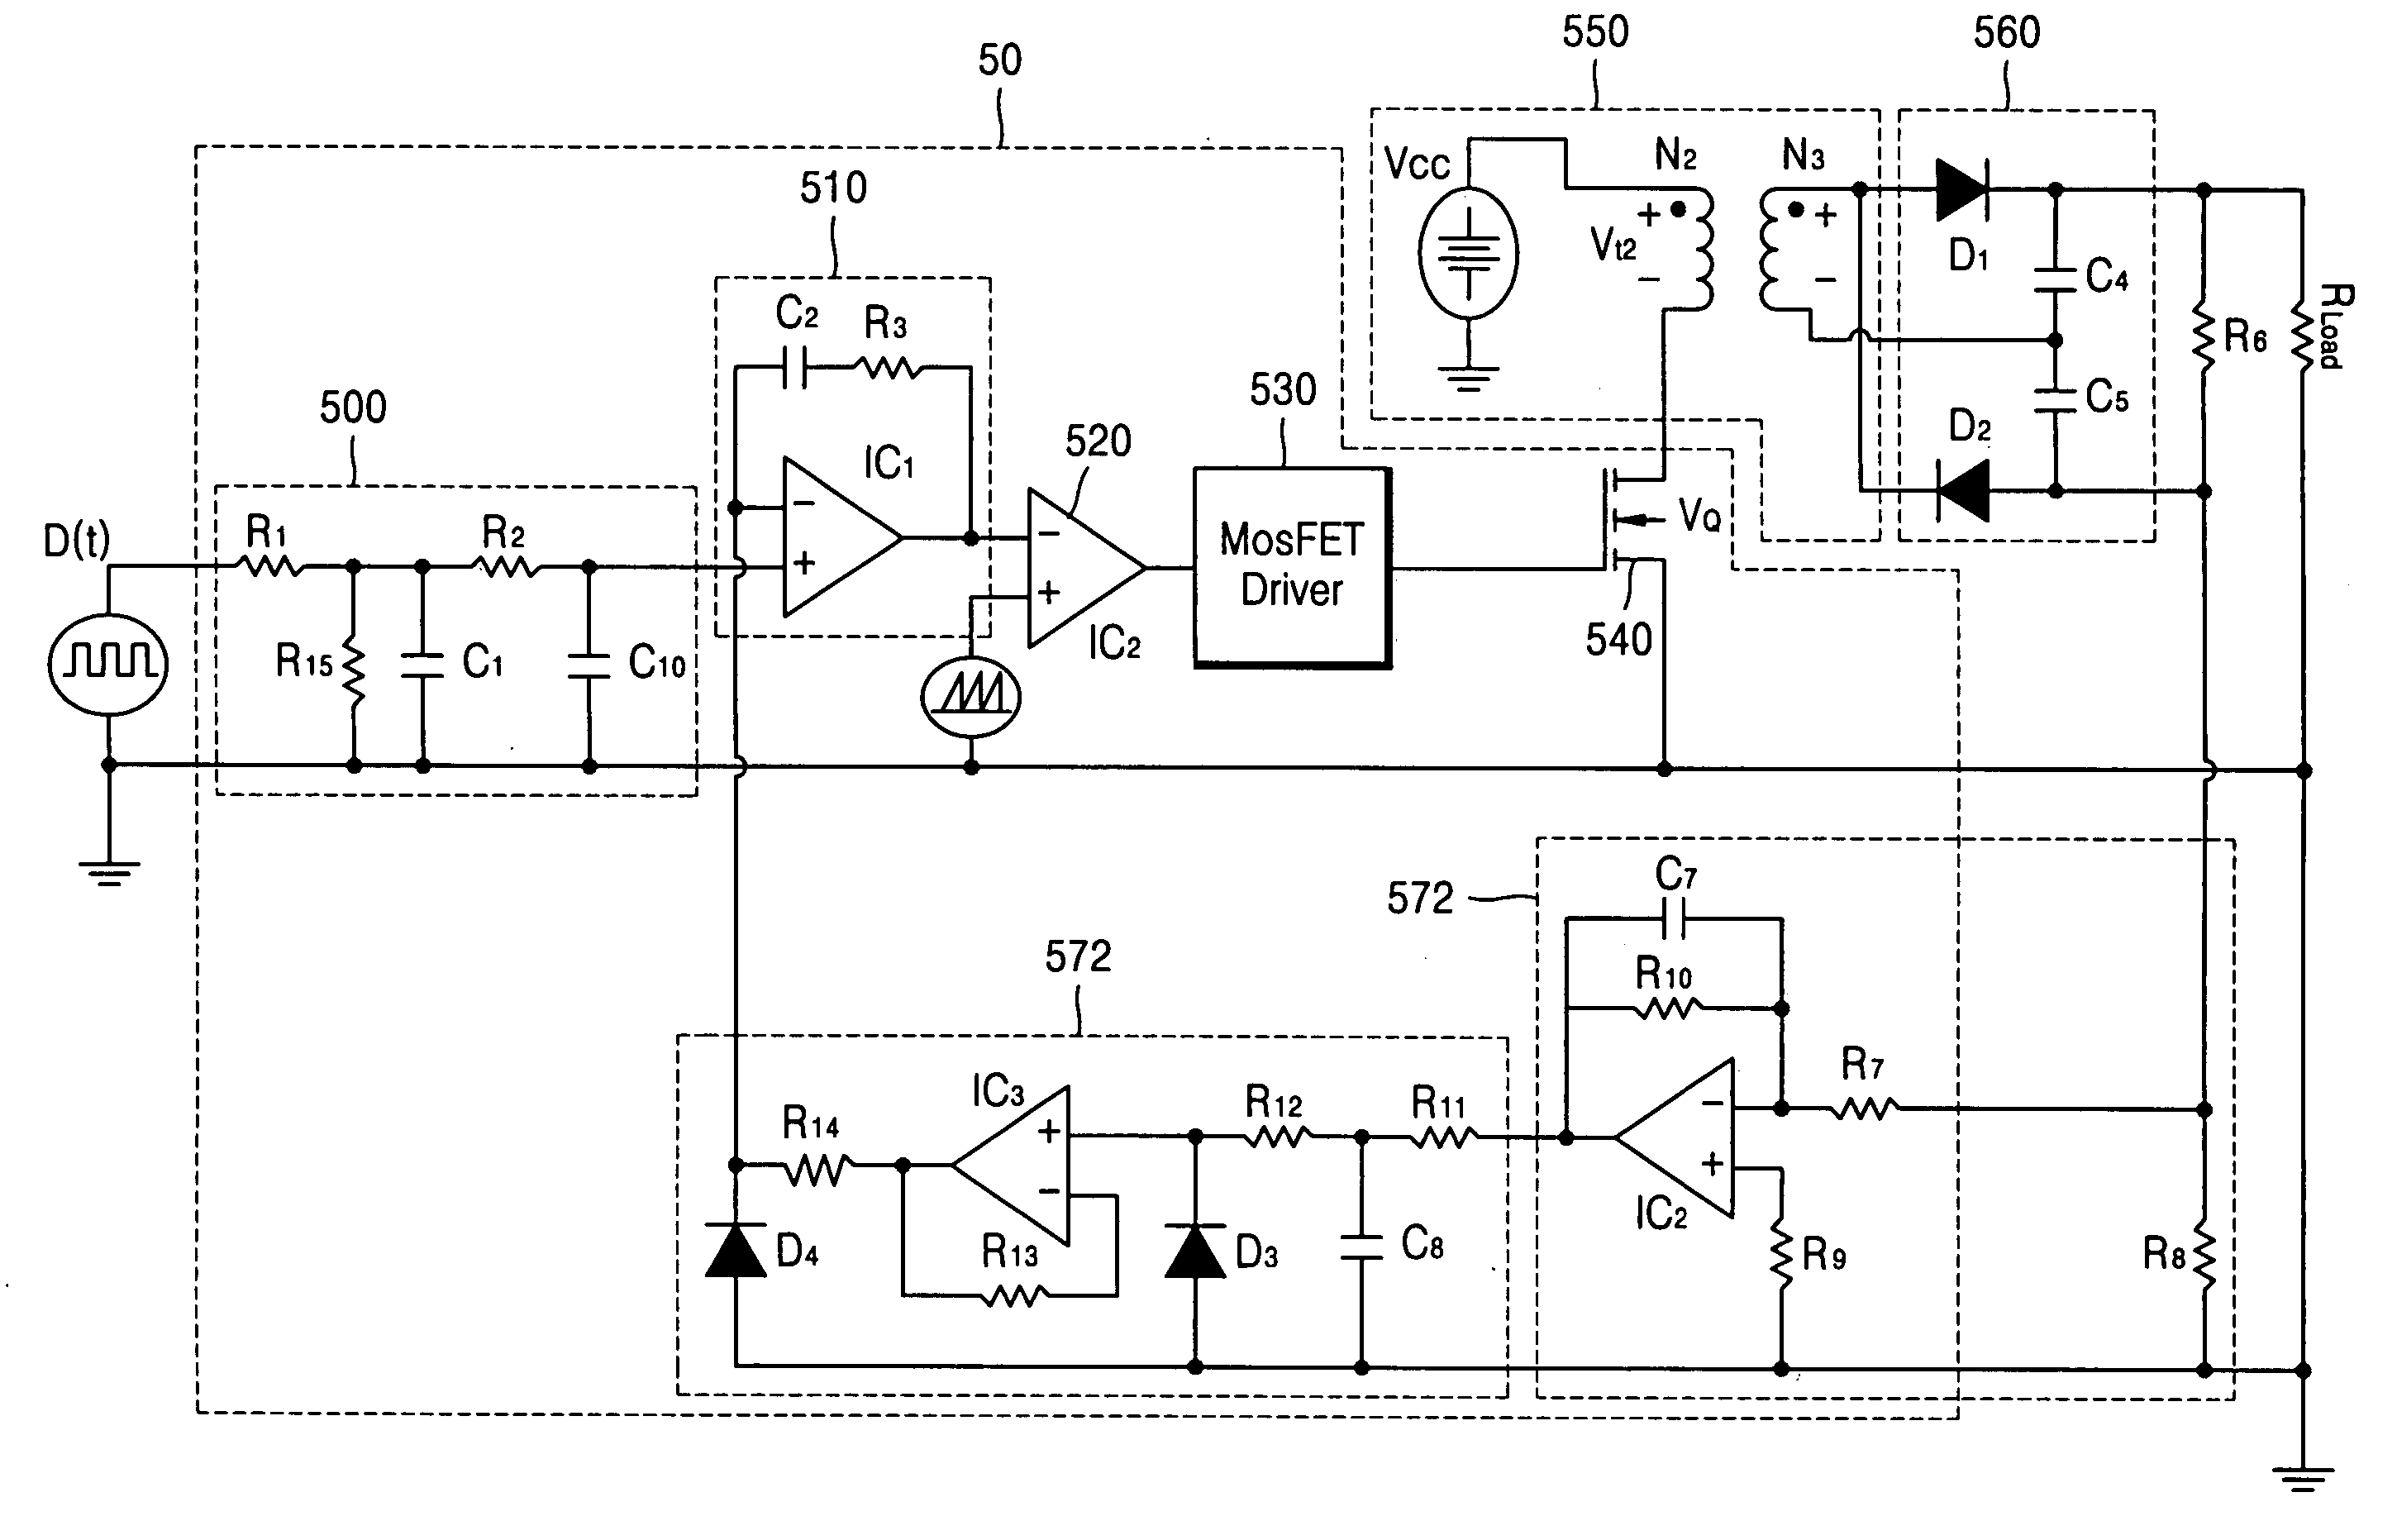 Analog control ASIC apparatus for high voltage power supply in image forming apparatus and method for controlling high voltage power supply